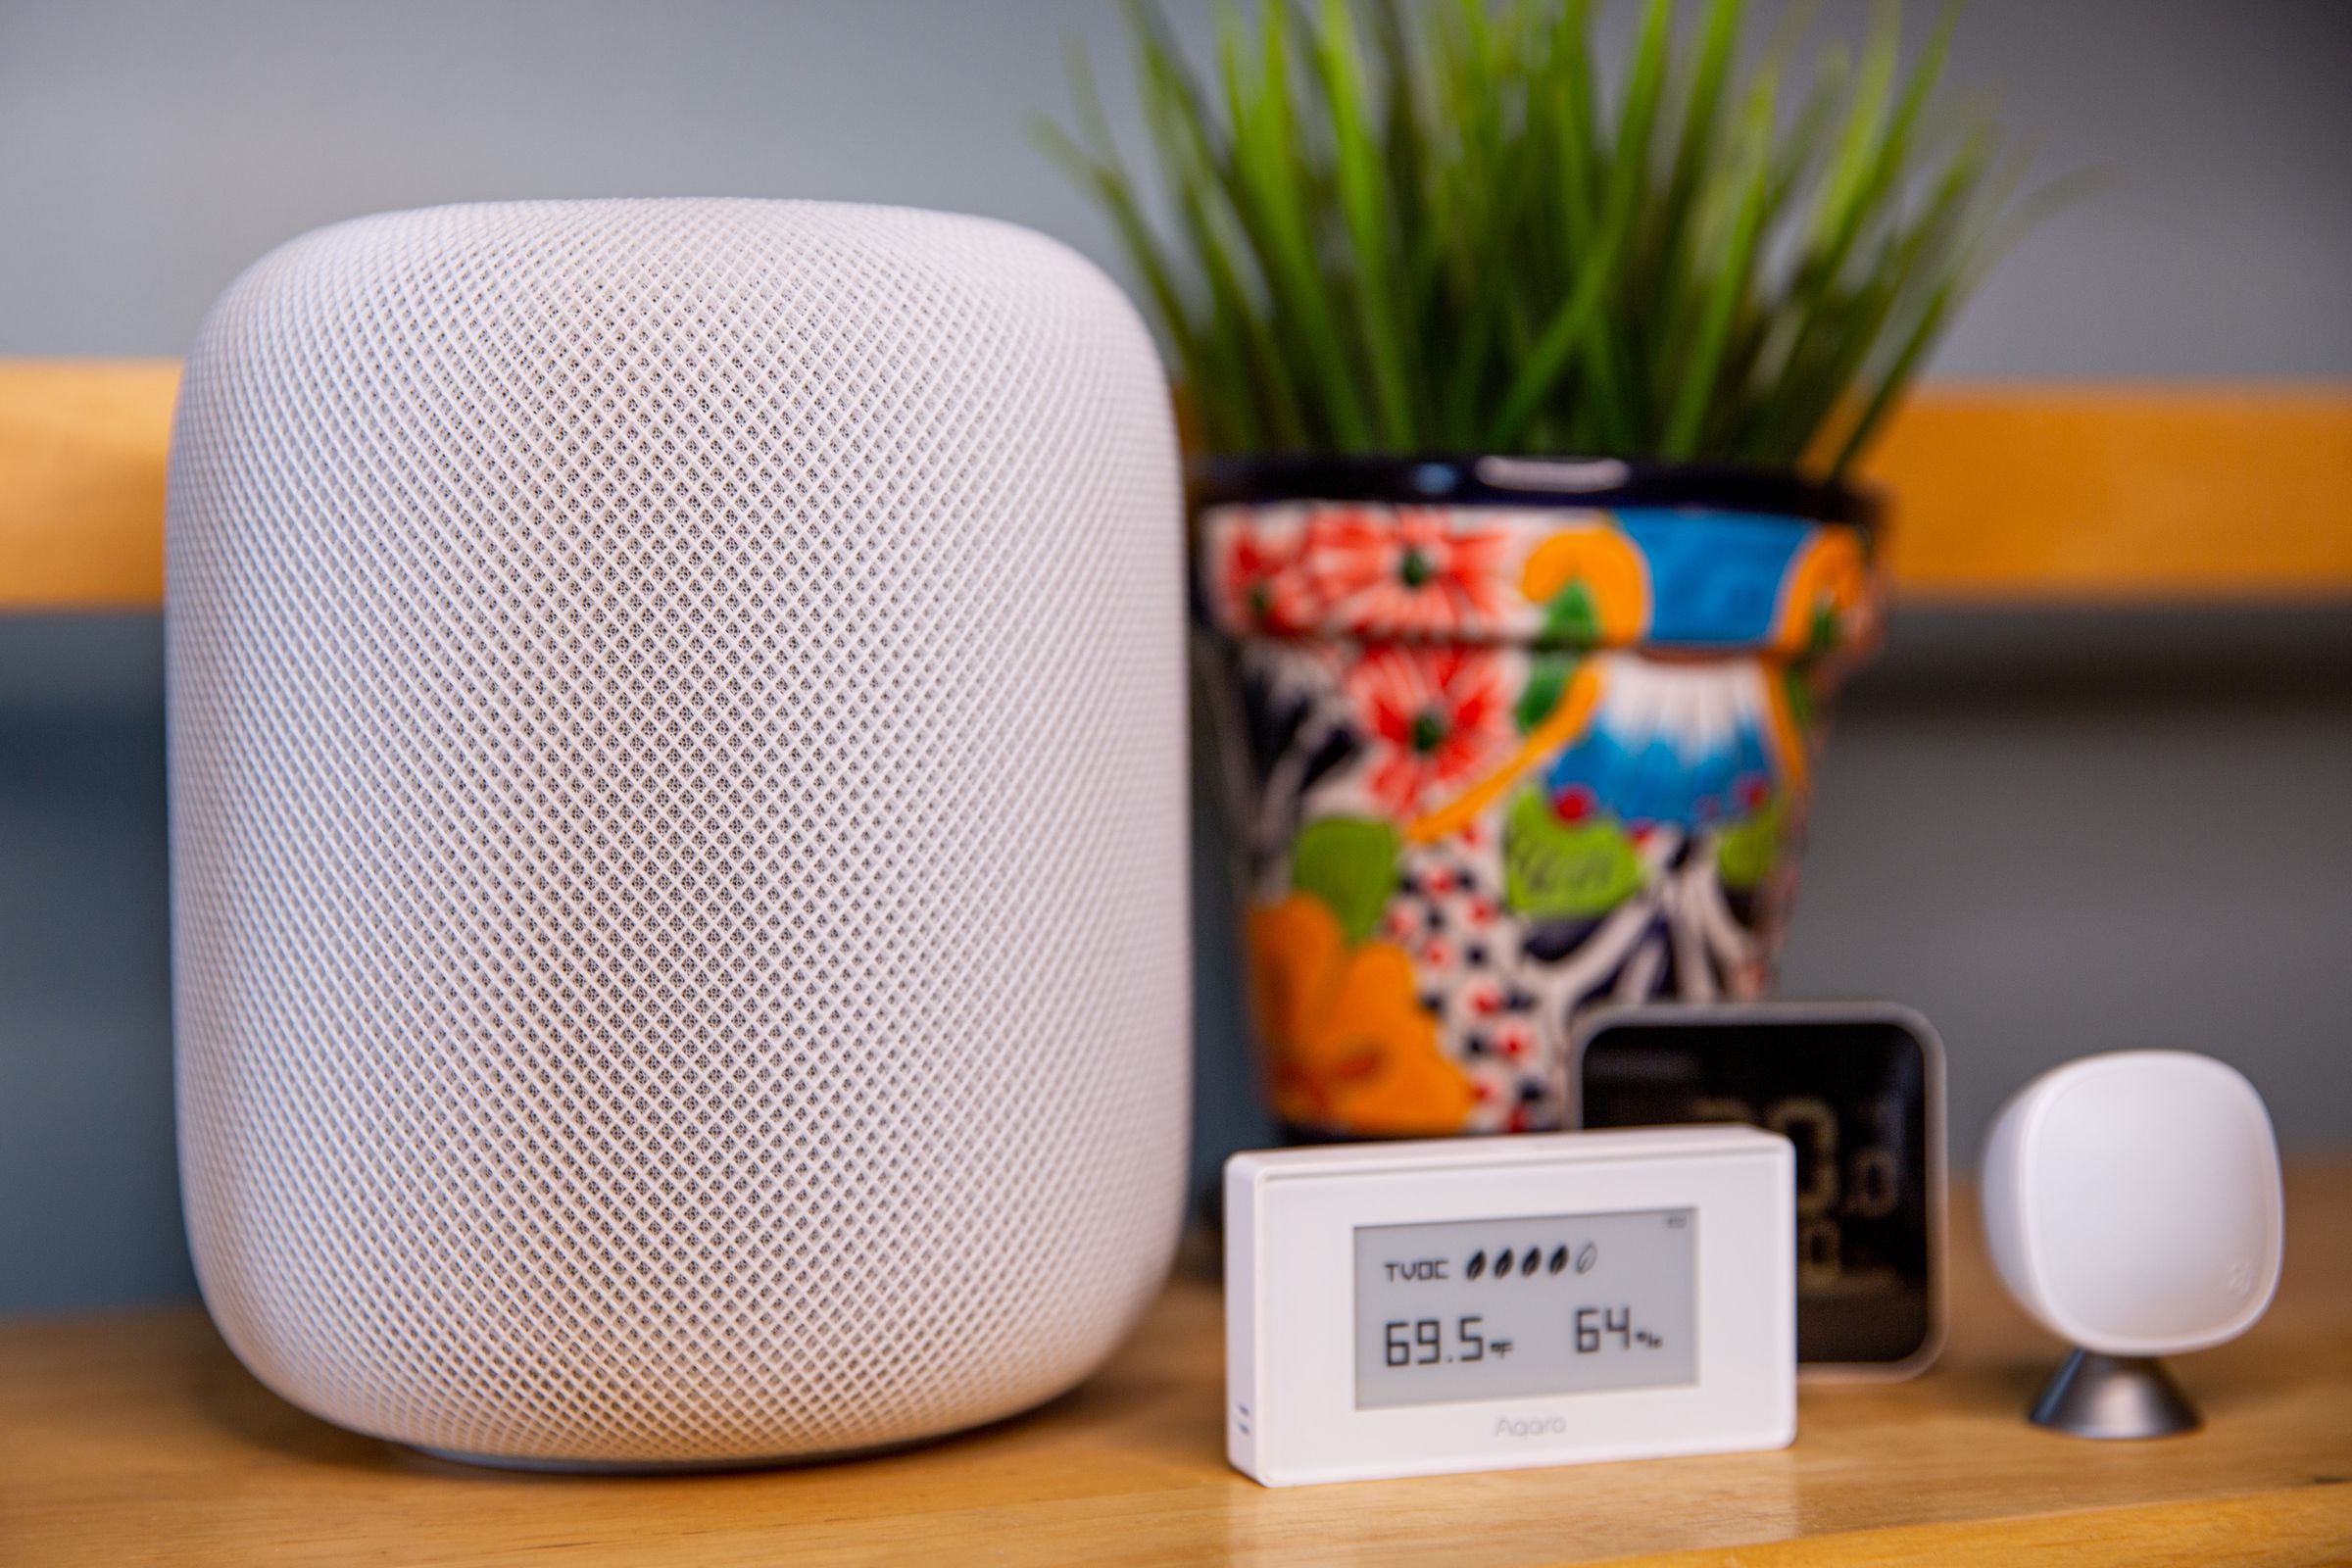 Temperature sensing on the new HomePod was accurate in our tests but responded to changes more slowly than dedicated sensors.